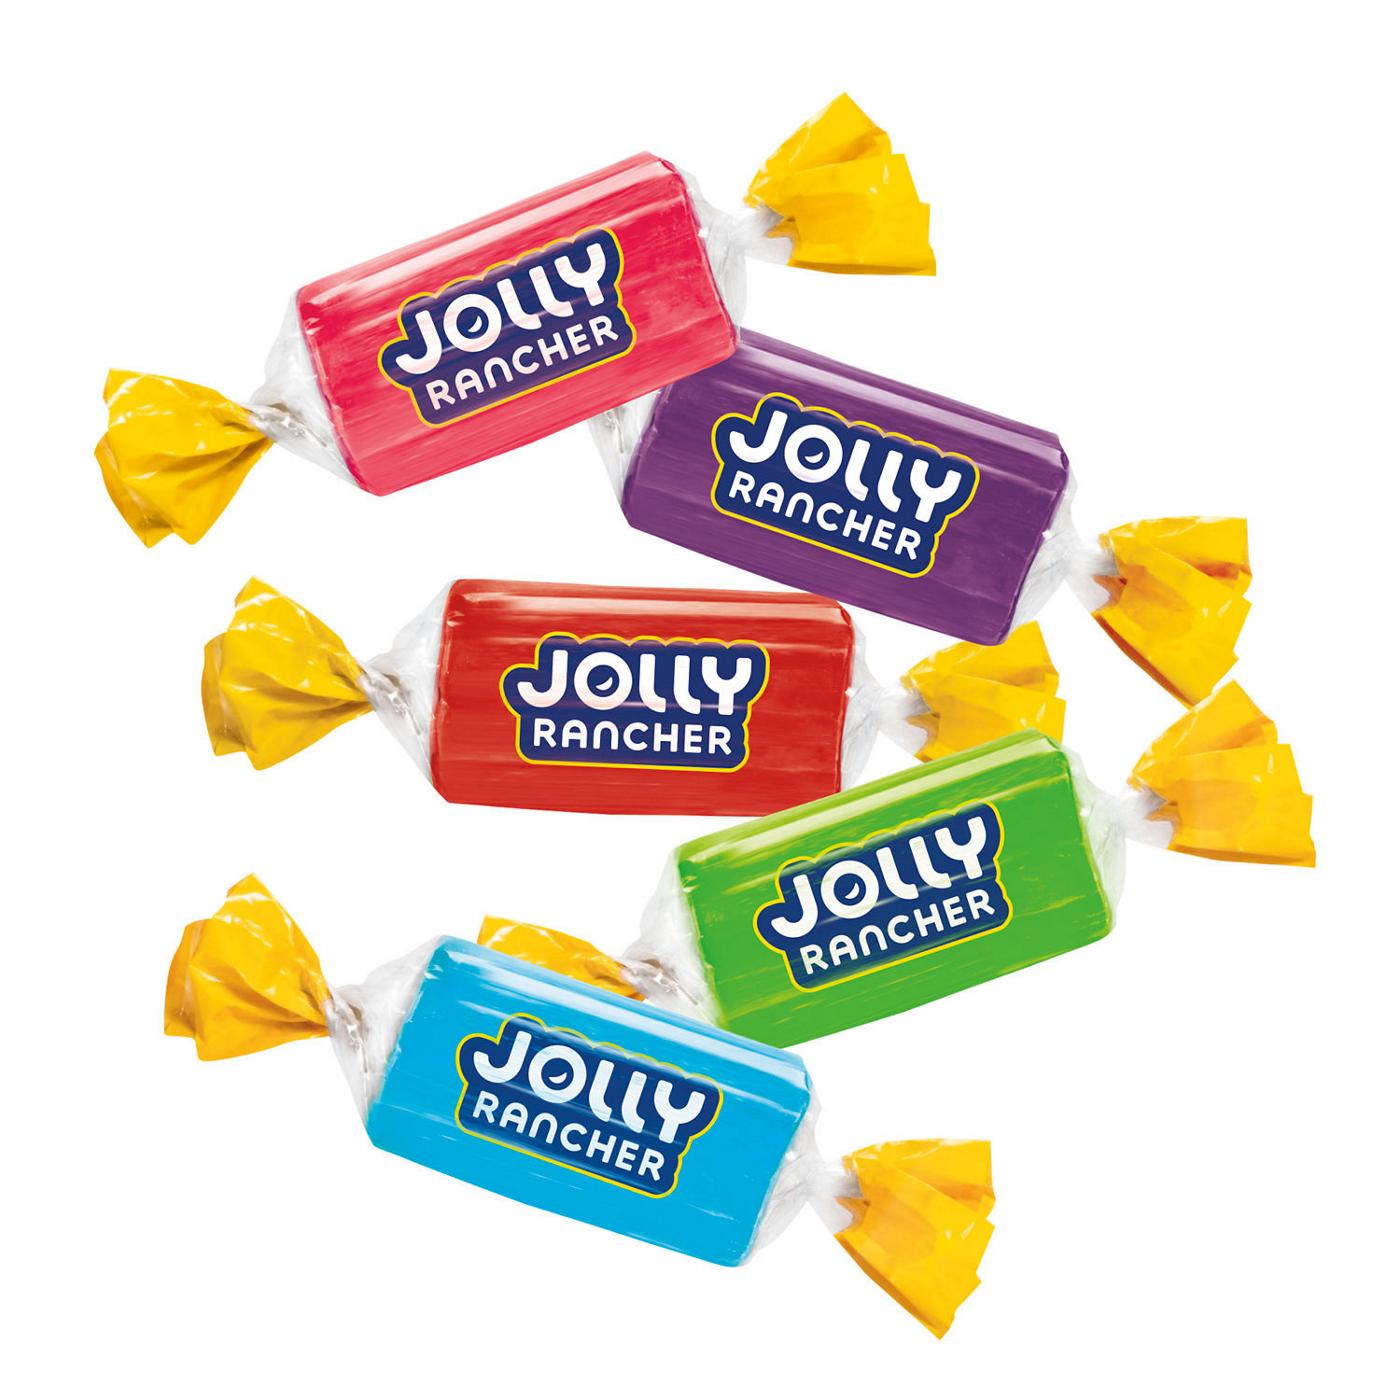 Jolly Rancher Original Hard Candy; image 2 of 6